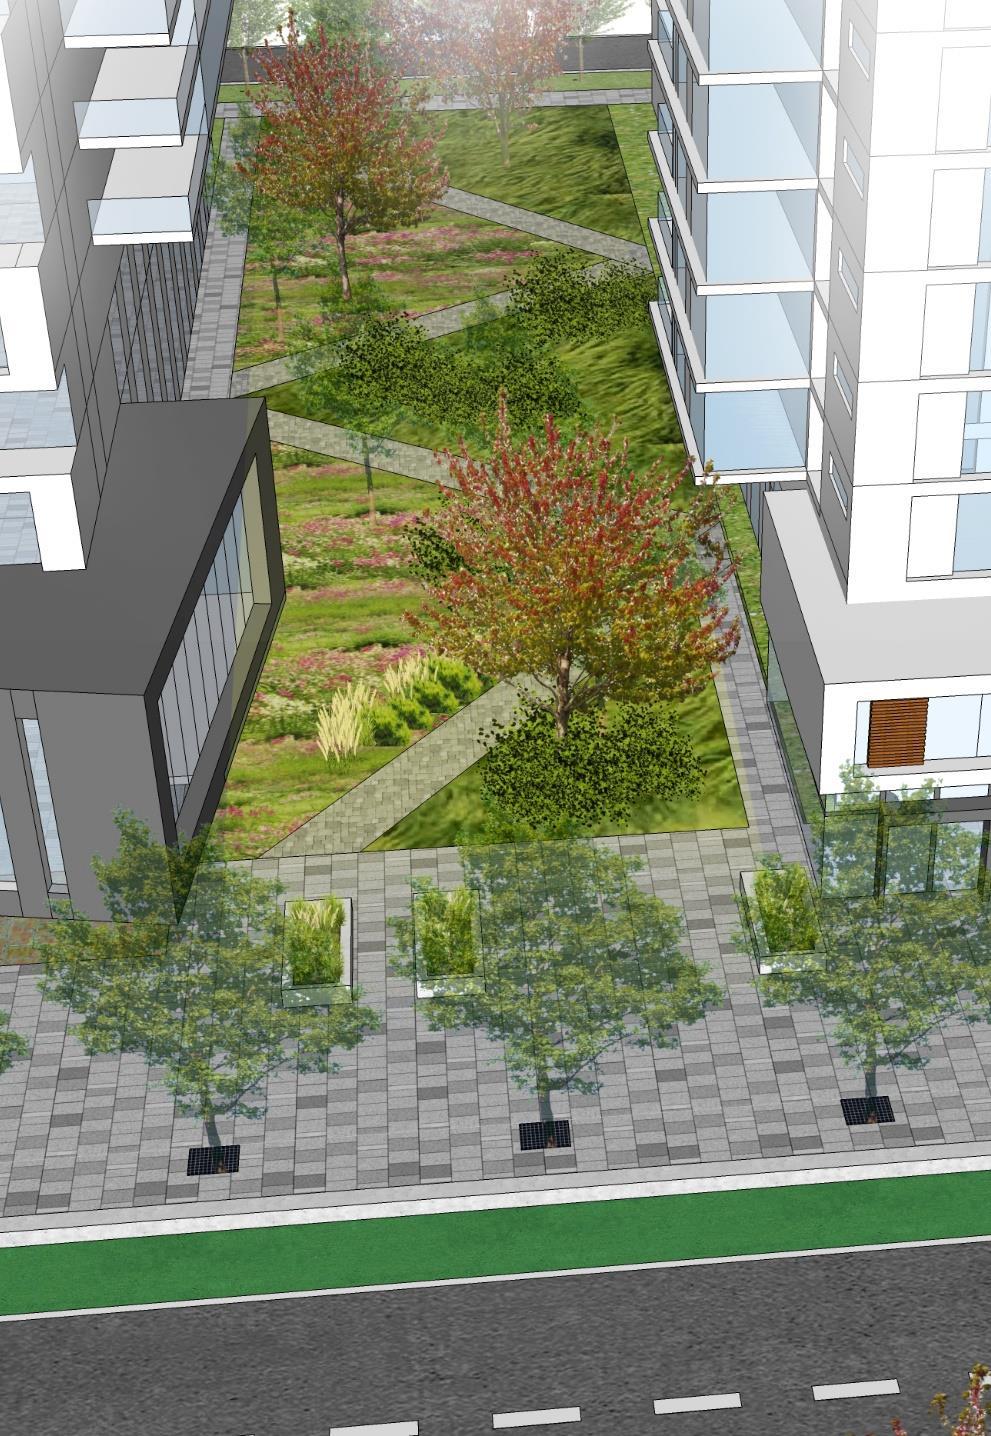 Demonstration plans to clearly implement the guidelines: Implementing the Green Approach Phased Intensification of a Retail Site with Mid-Rise Development Mid to Low-Rise Development